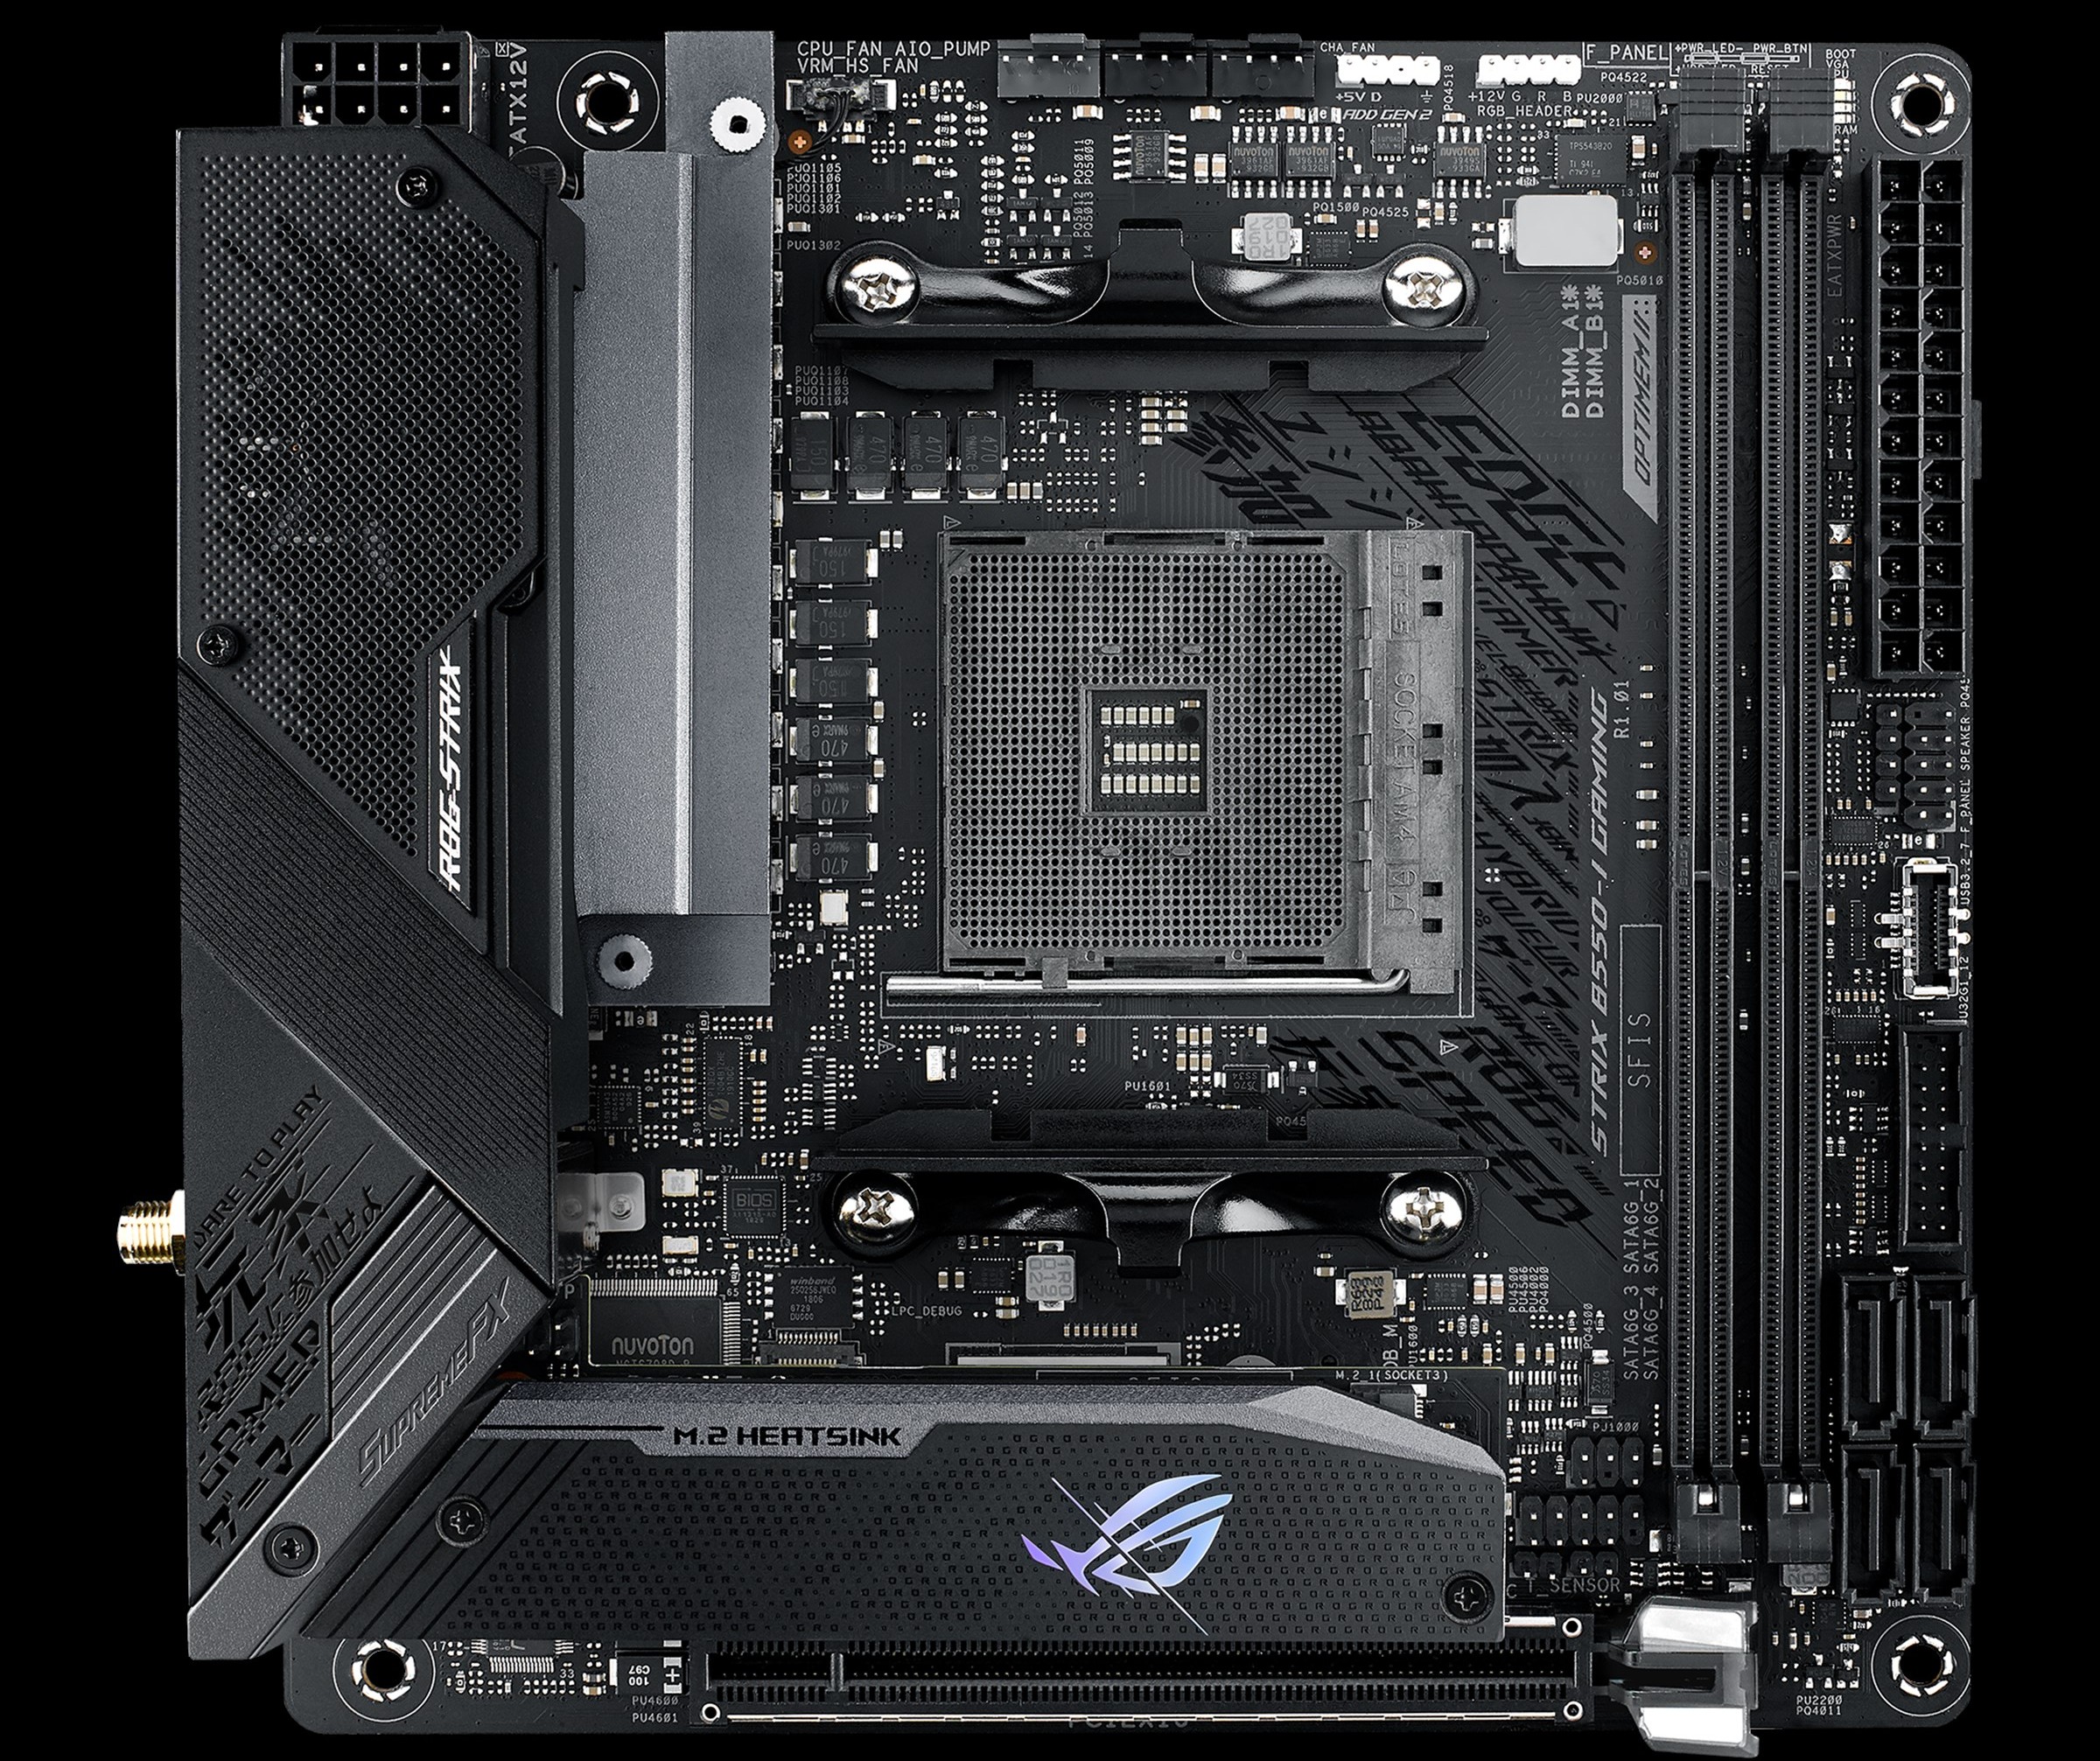 ASUS ROG Strix B550-I Gaming - The AMD B550 Motherboard Overview: ASUS